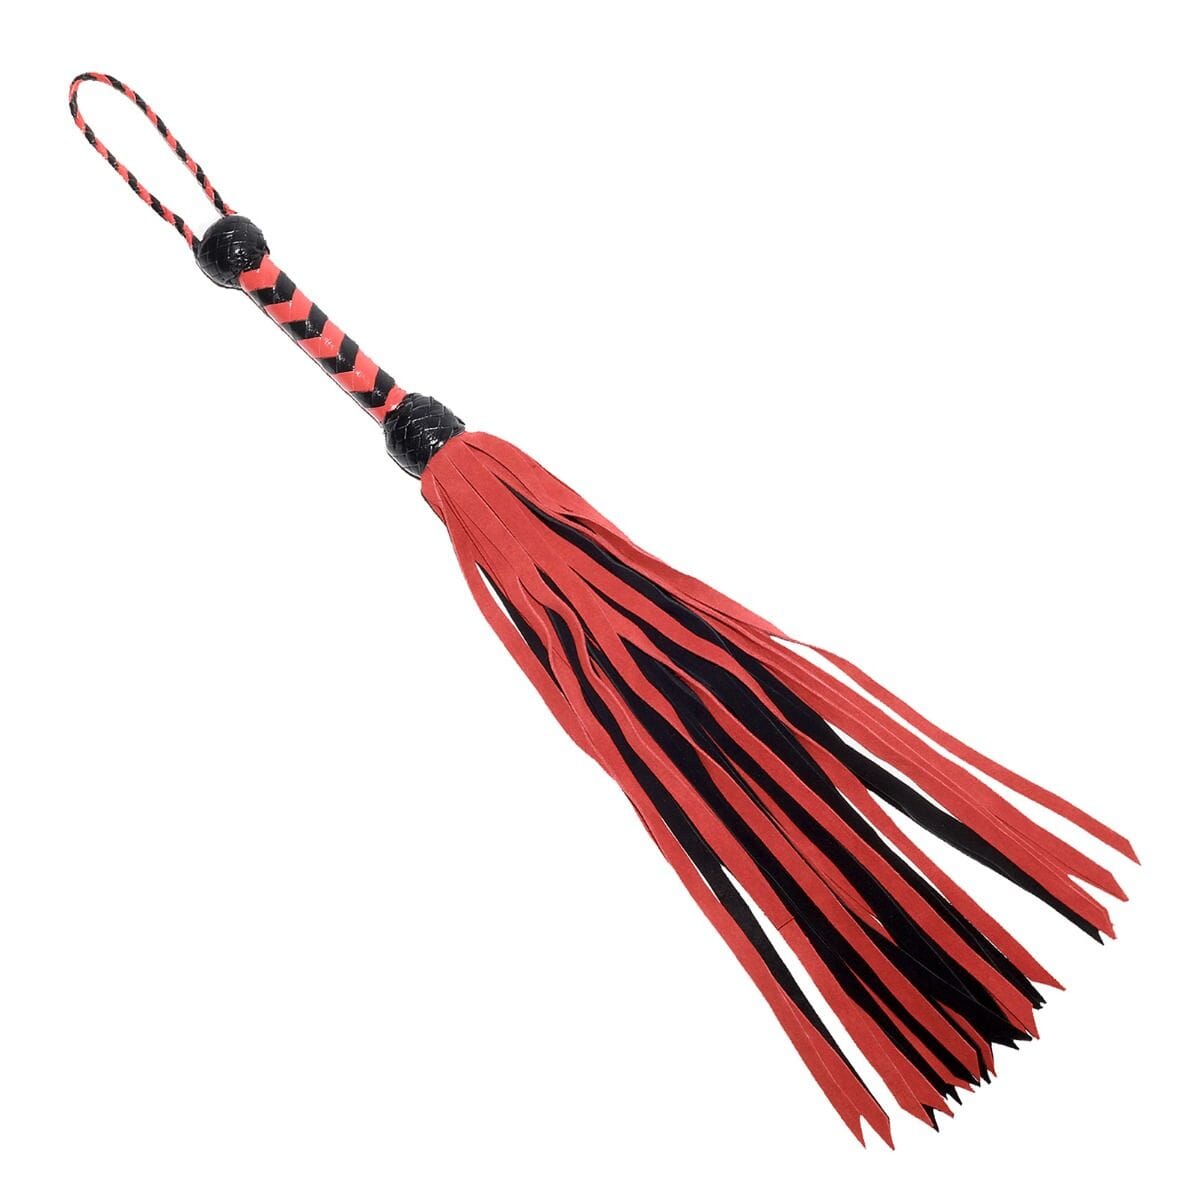 Long Leather & Suede Flogger-Black/Red Whips, Floggers & Paddles Prowler RED (ABS), (ABS PRO) 